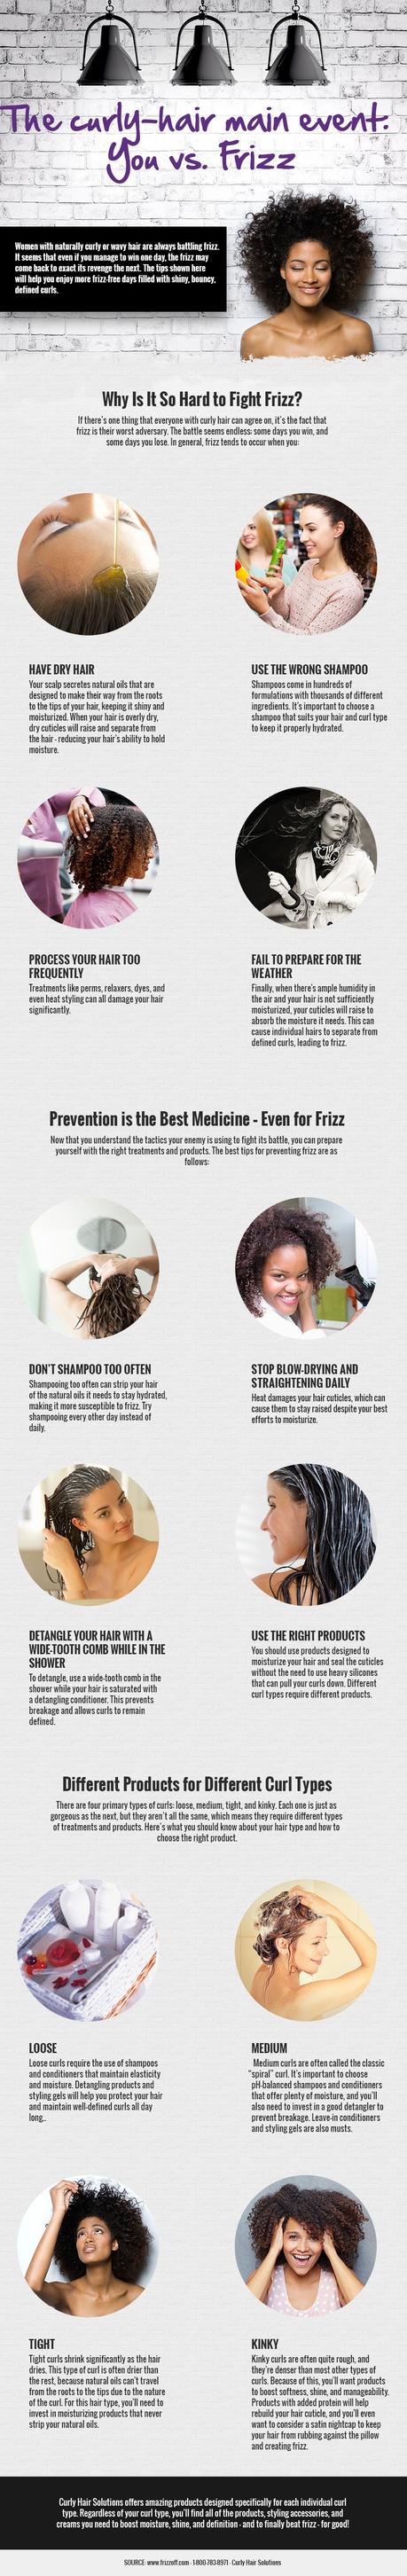 The Curly-Hair Main Event: You vs. Frizz